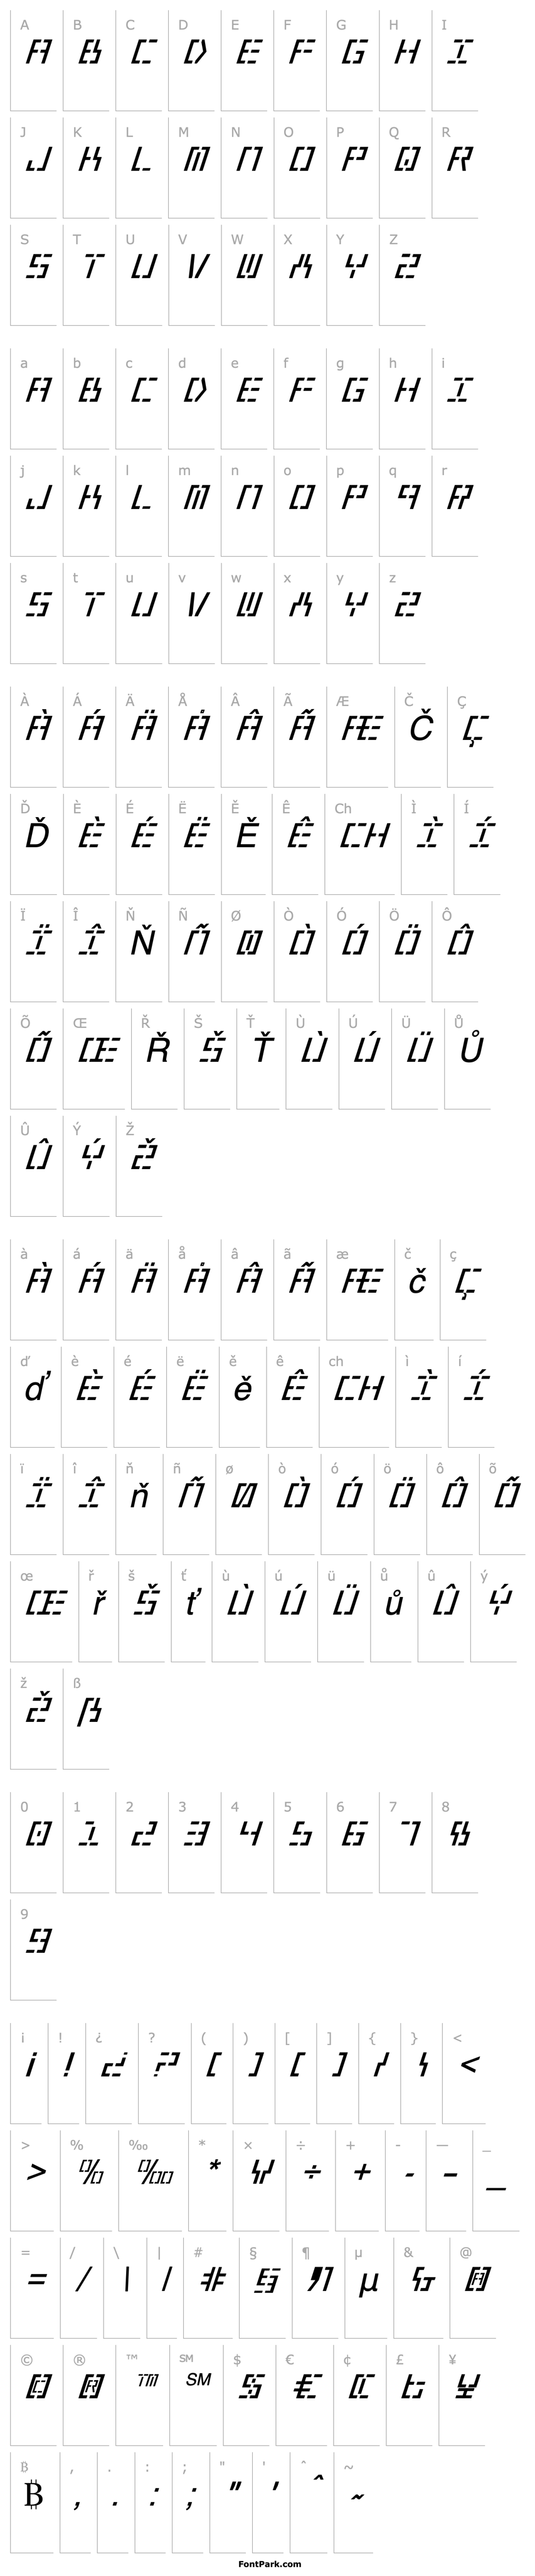 Overview Year 2000 Italic